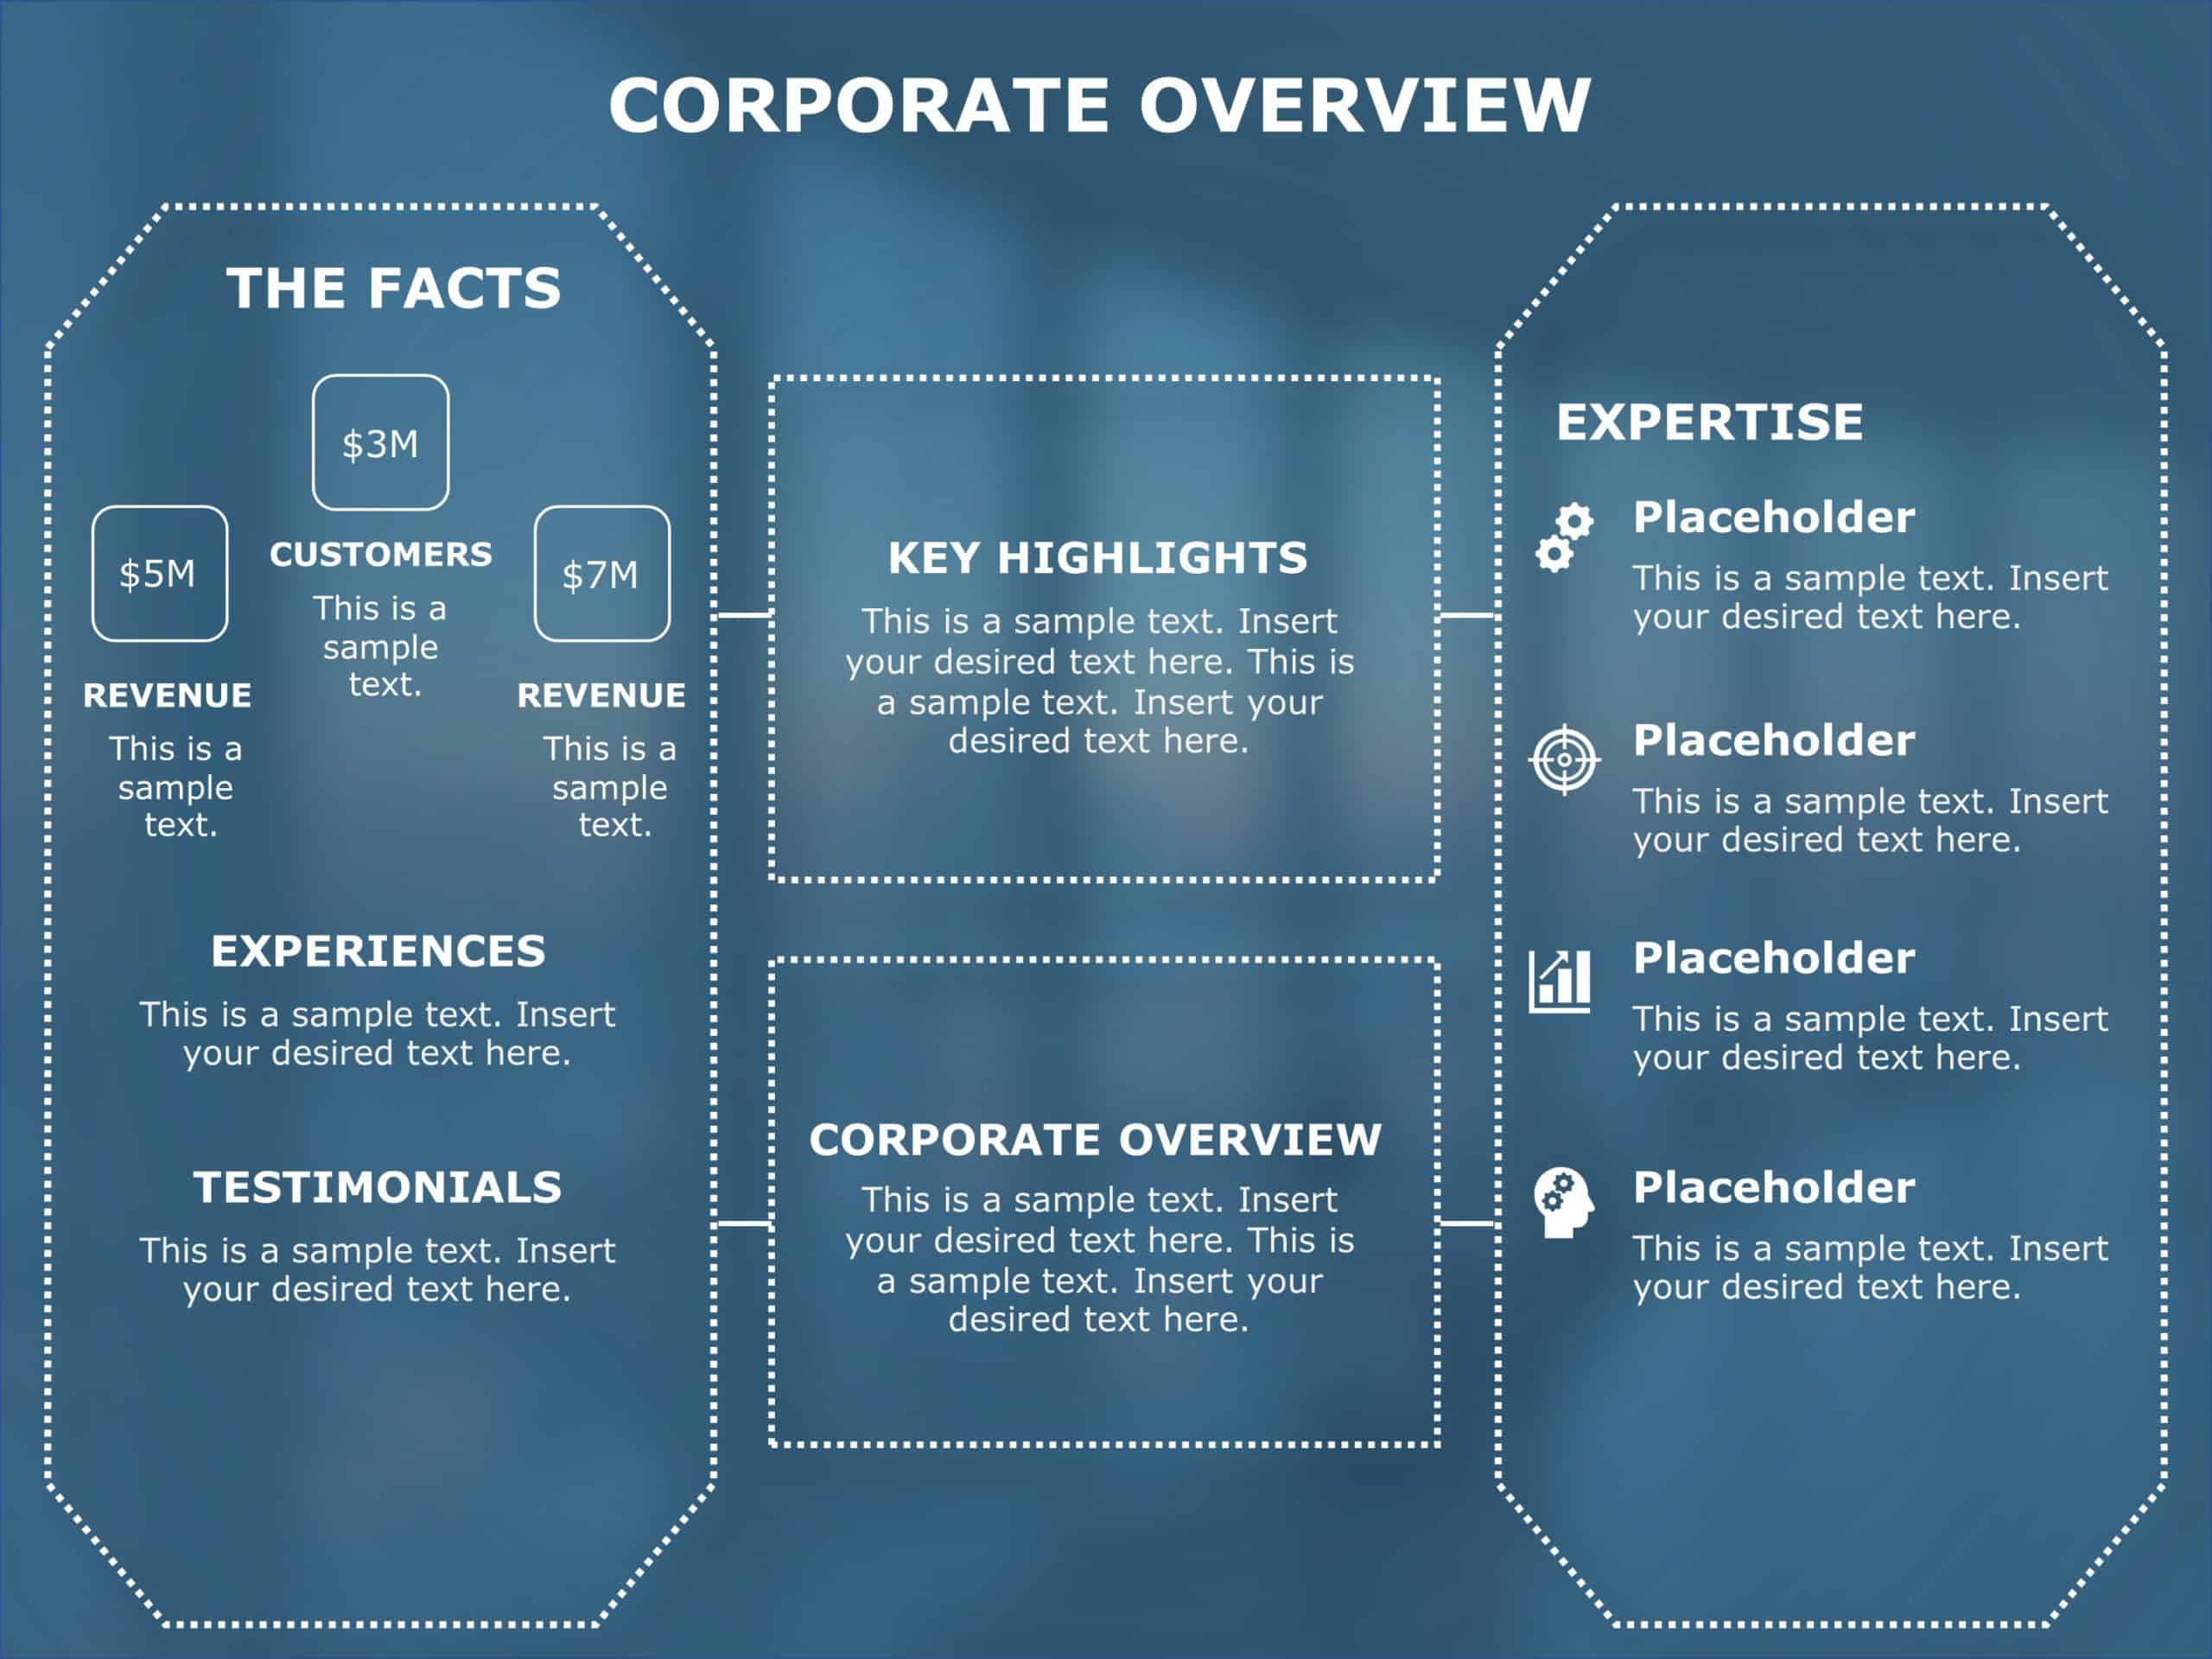 Corporate Overview PowerPoint Template